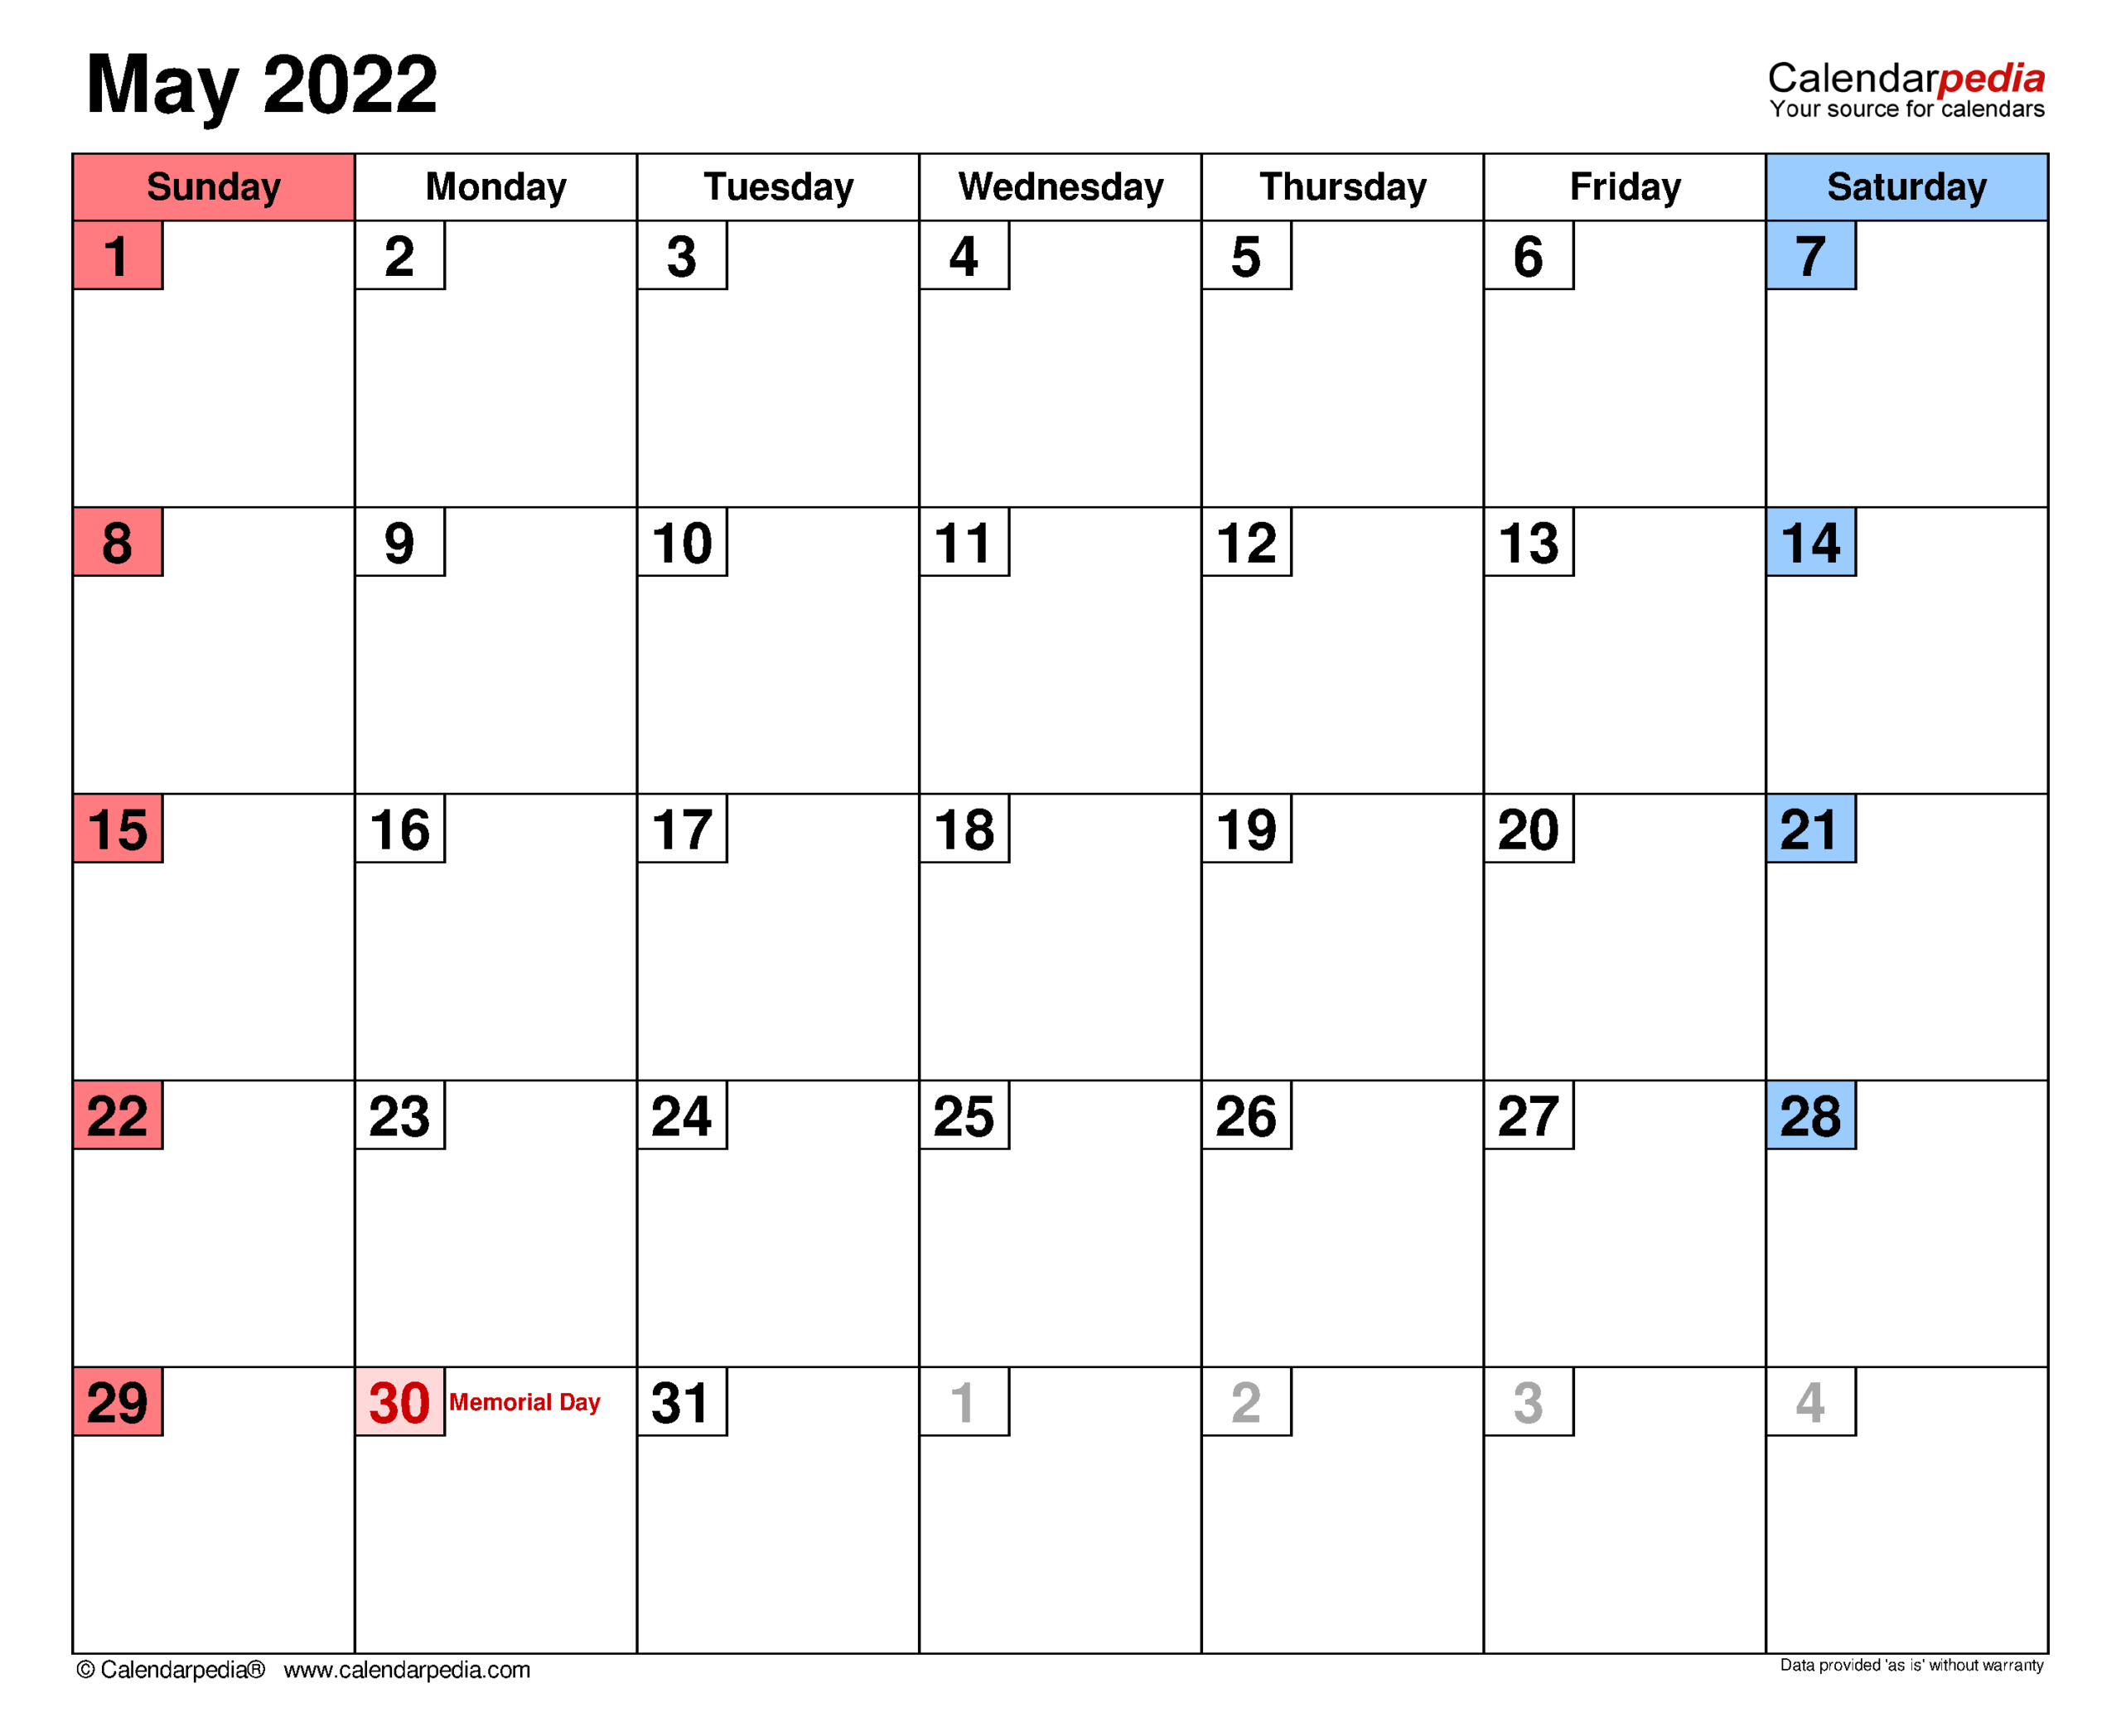 Collect May 2022 Calendar With Us Holidays